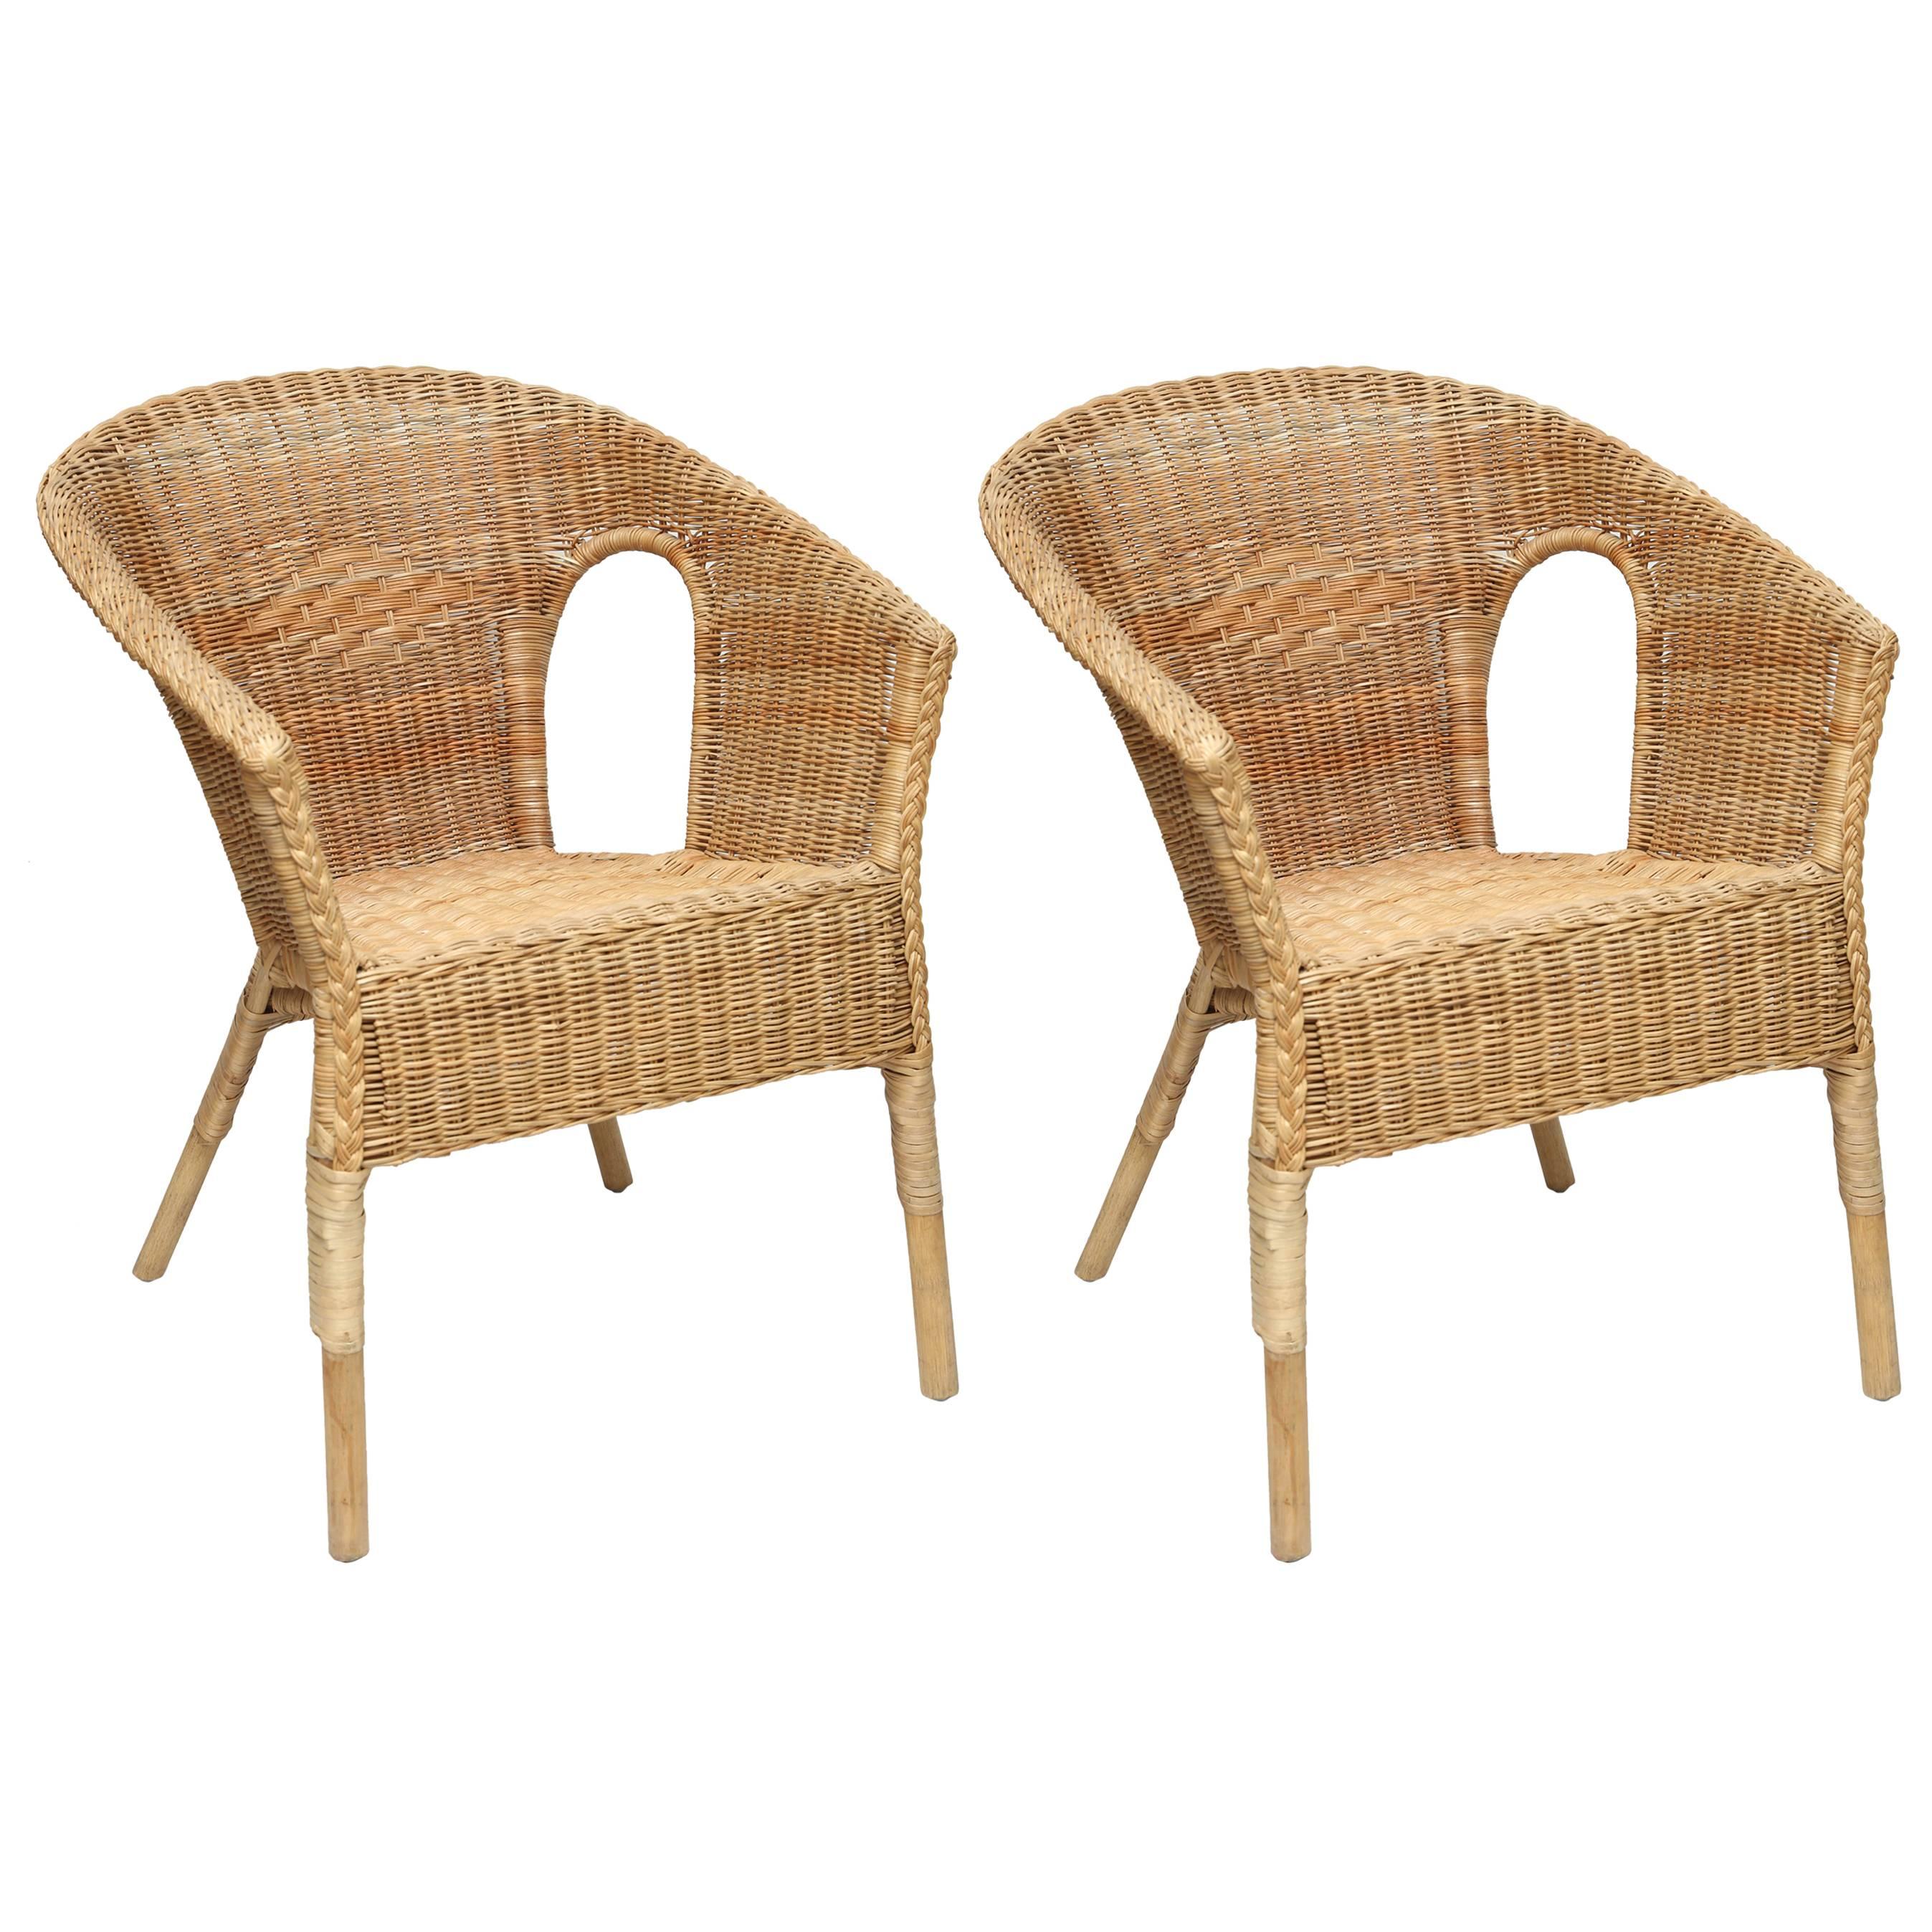 Great Pair of French Vintage Rattan Armchairs